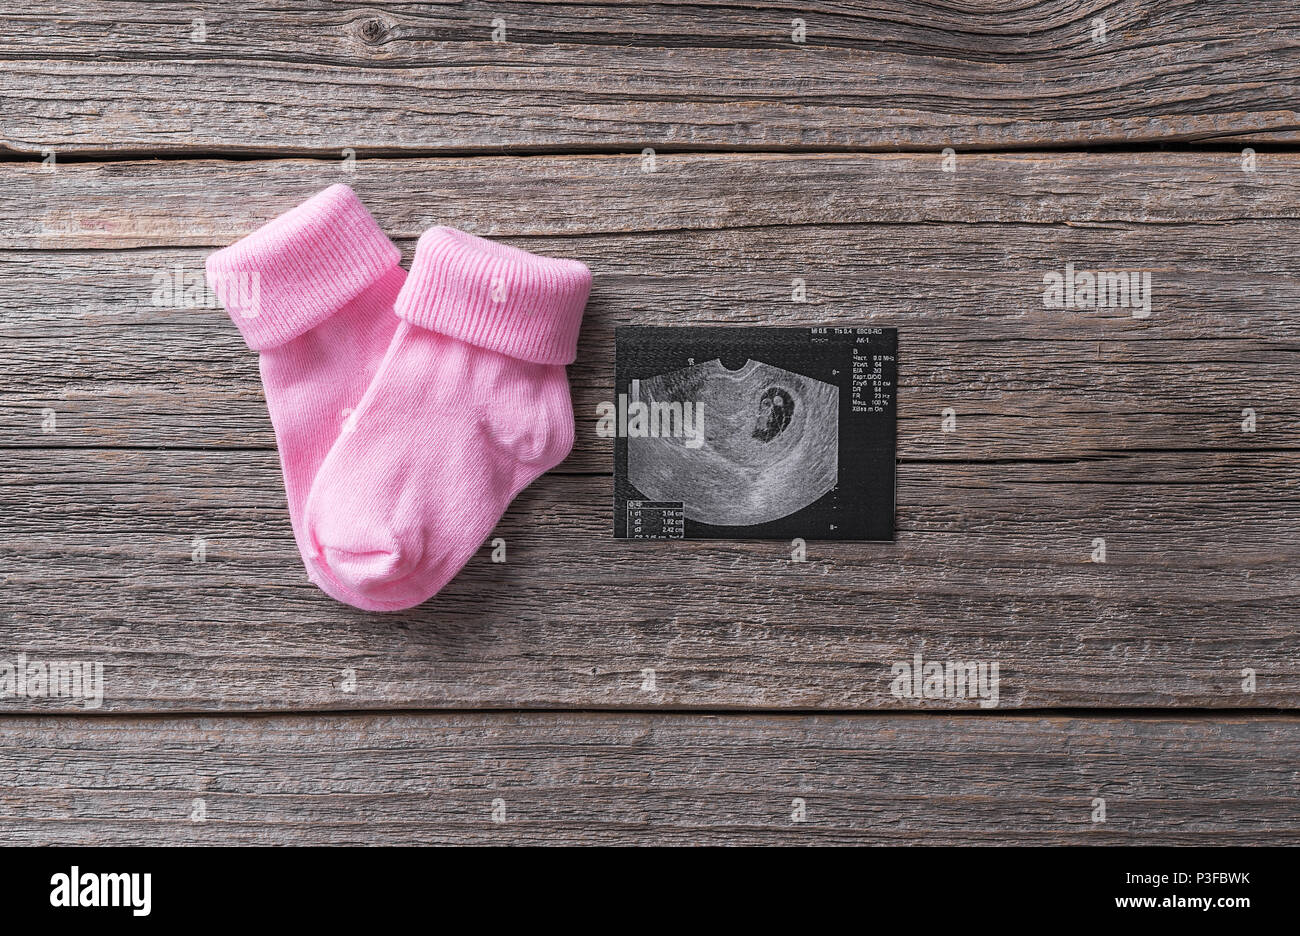 Baby socks picture of the embryo. Stock Photo